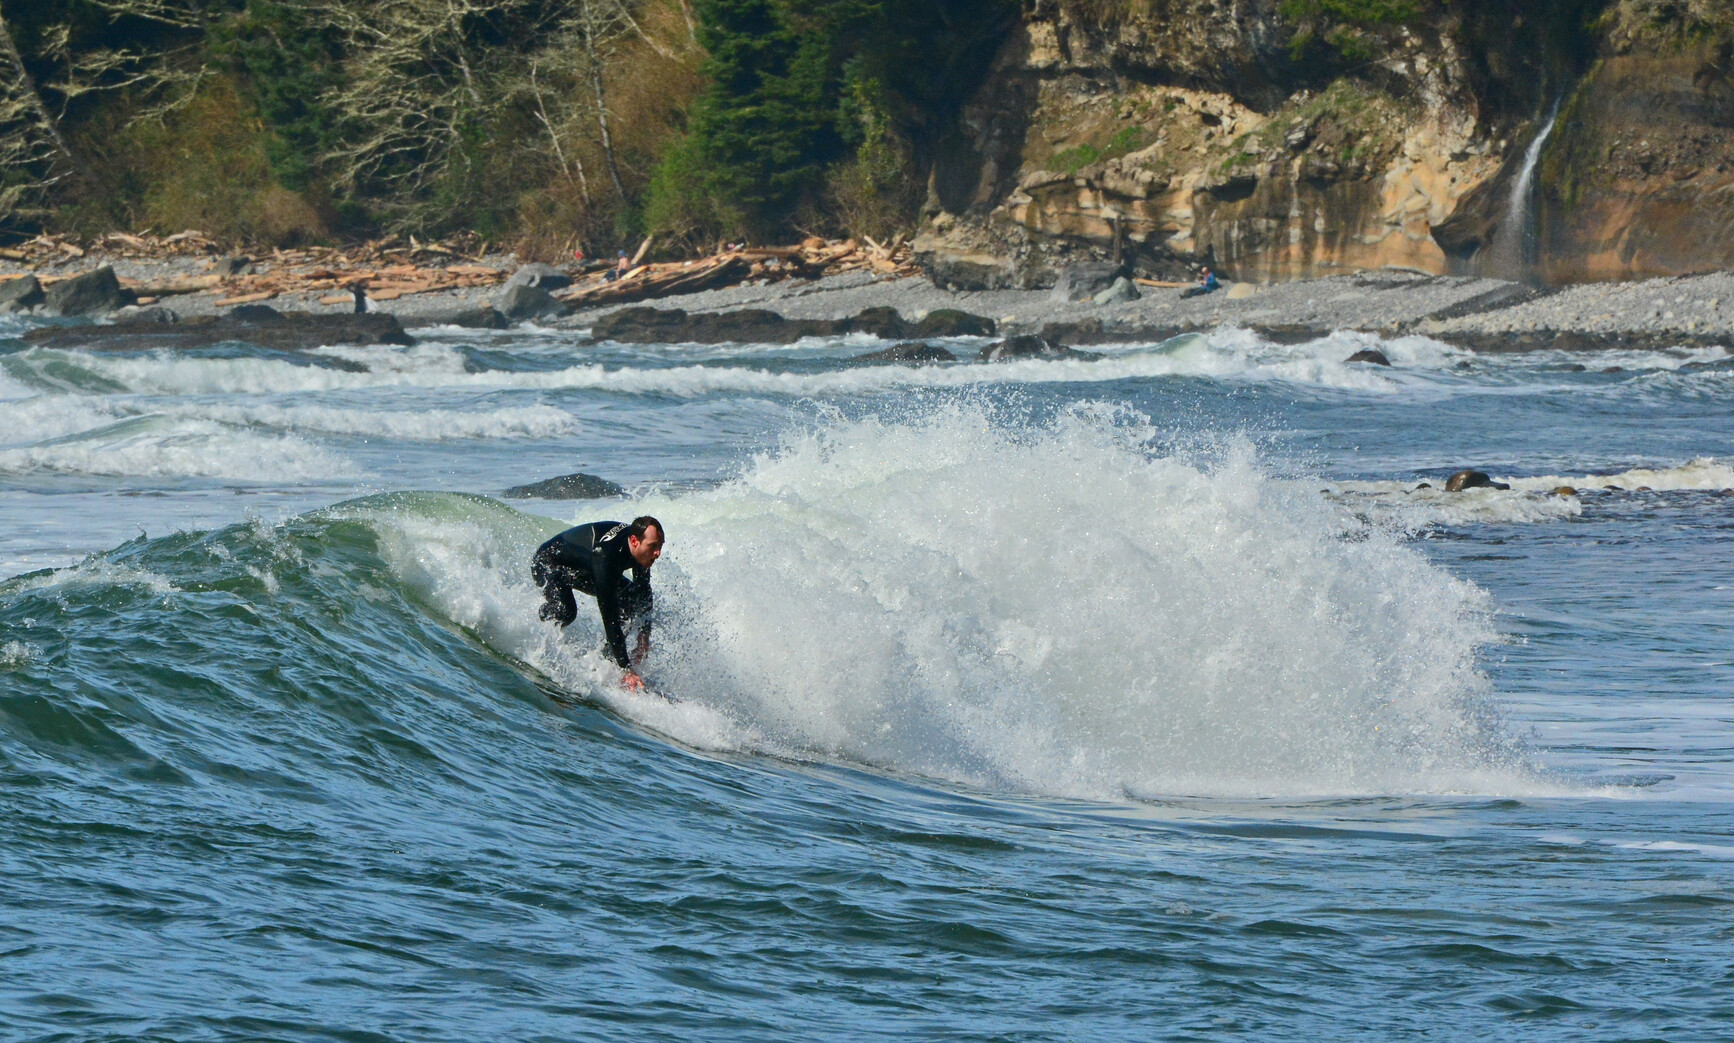 A surfer rides a wave at Sombrio Beach in Juan De Fuca Park. Along the beach, logs lay in front of the rocky and forest covered sandstone walls of the shoreline.